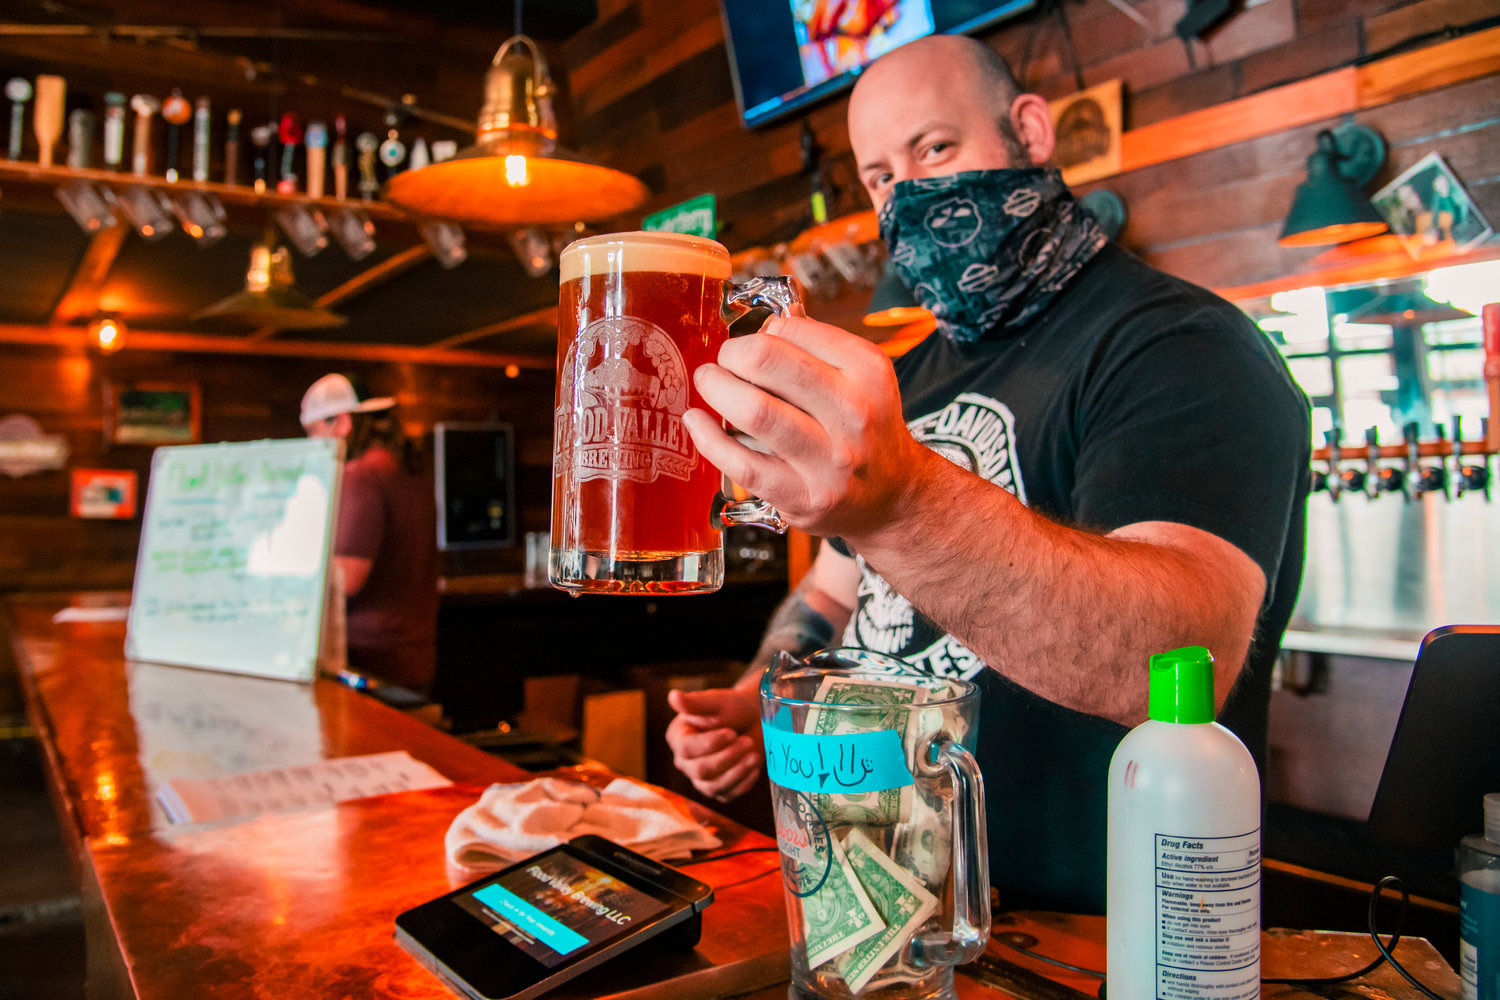 Chris Rohr, owner of Flood Valley Brewing Craft Taphouse, holds up a mug of the new “Chehalis Ave IPA” ordered on Friday in Chehalis.